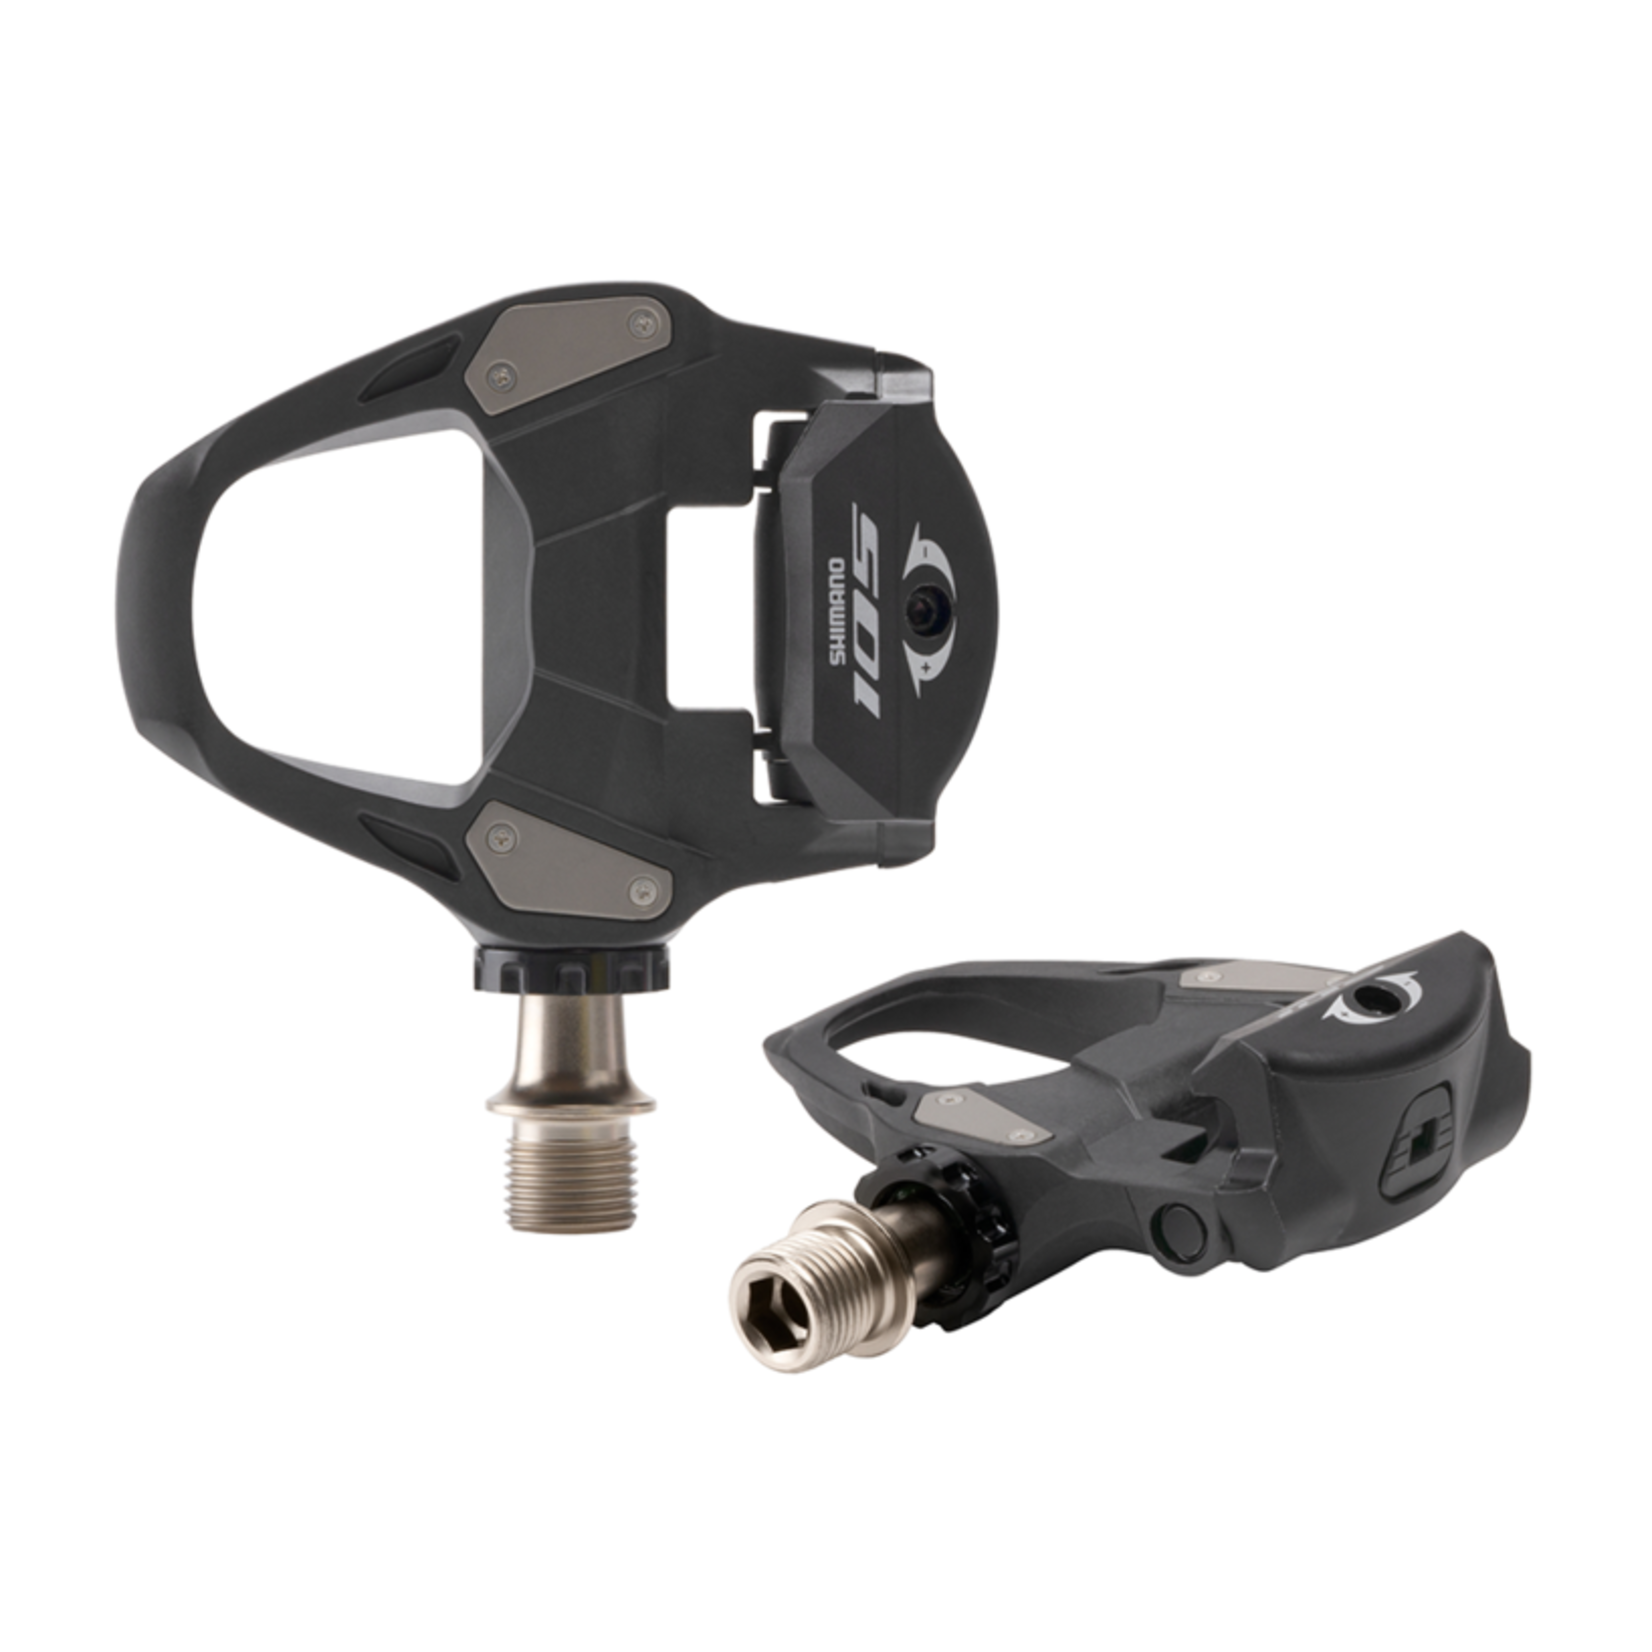 Shimano PD-R7000 105 Pedals